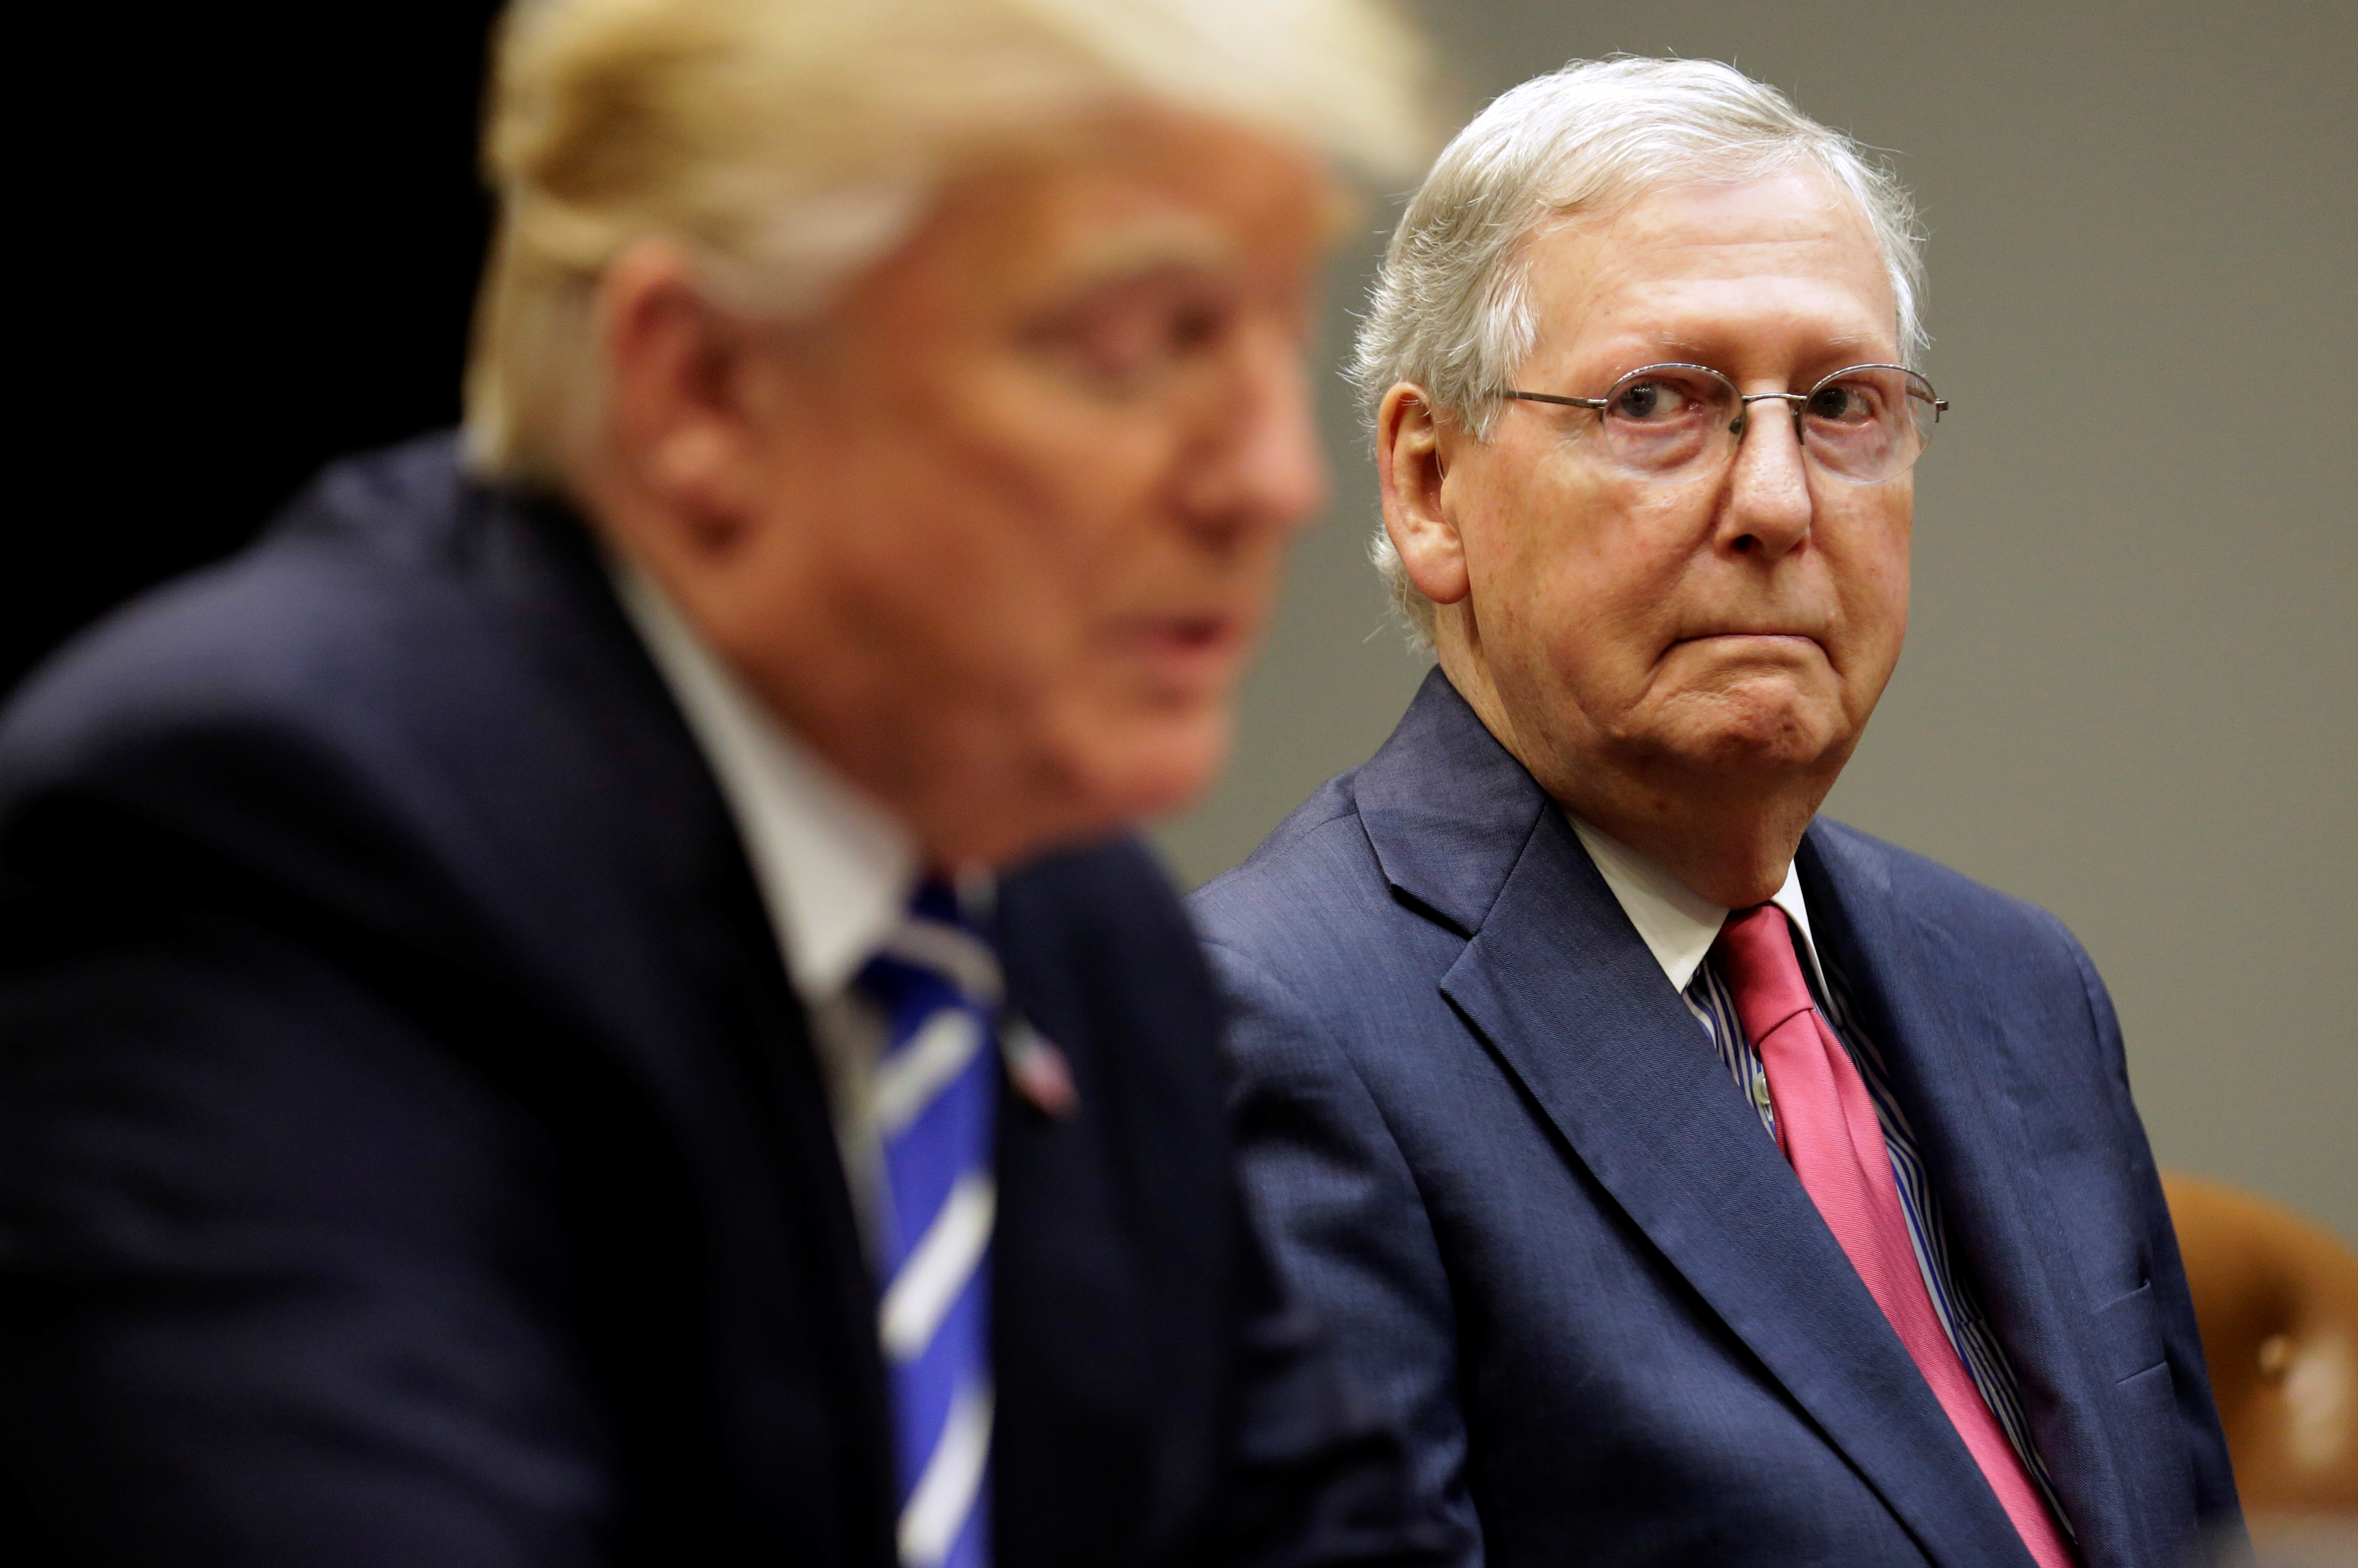 President Trump and Senate Majority Leader Mitch McConnell.